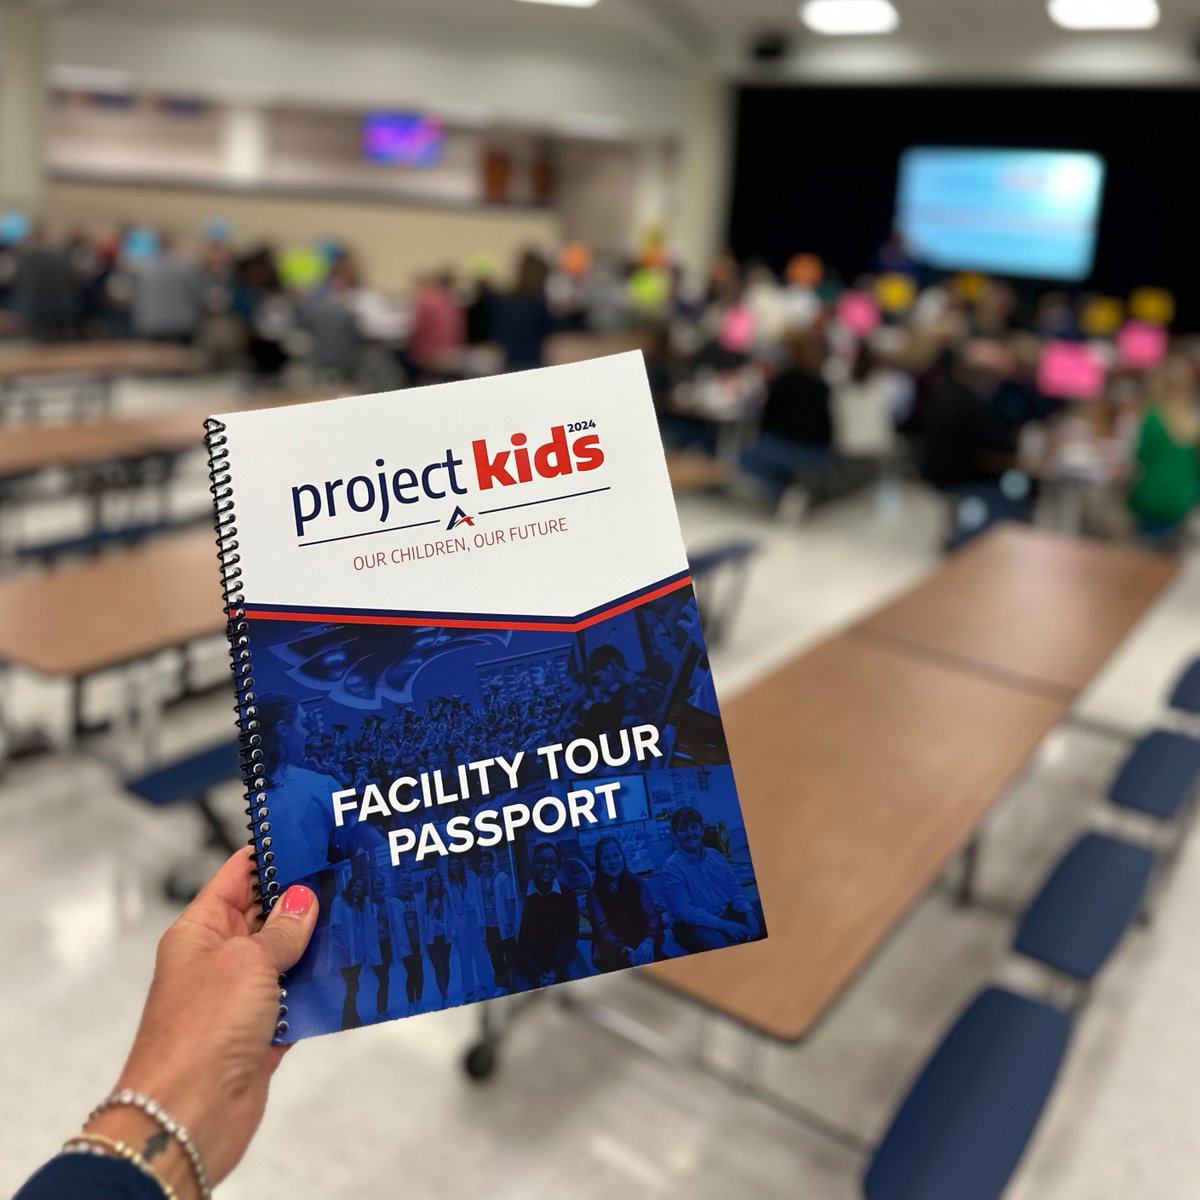 The Project Kids Committee Facility Tours in Allen ISD have been eye-opening, informative, and a huge success. It's been great to work with the Allen ISD community. They are really coming together to build a better future for all Allen Eagles. #VLK